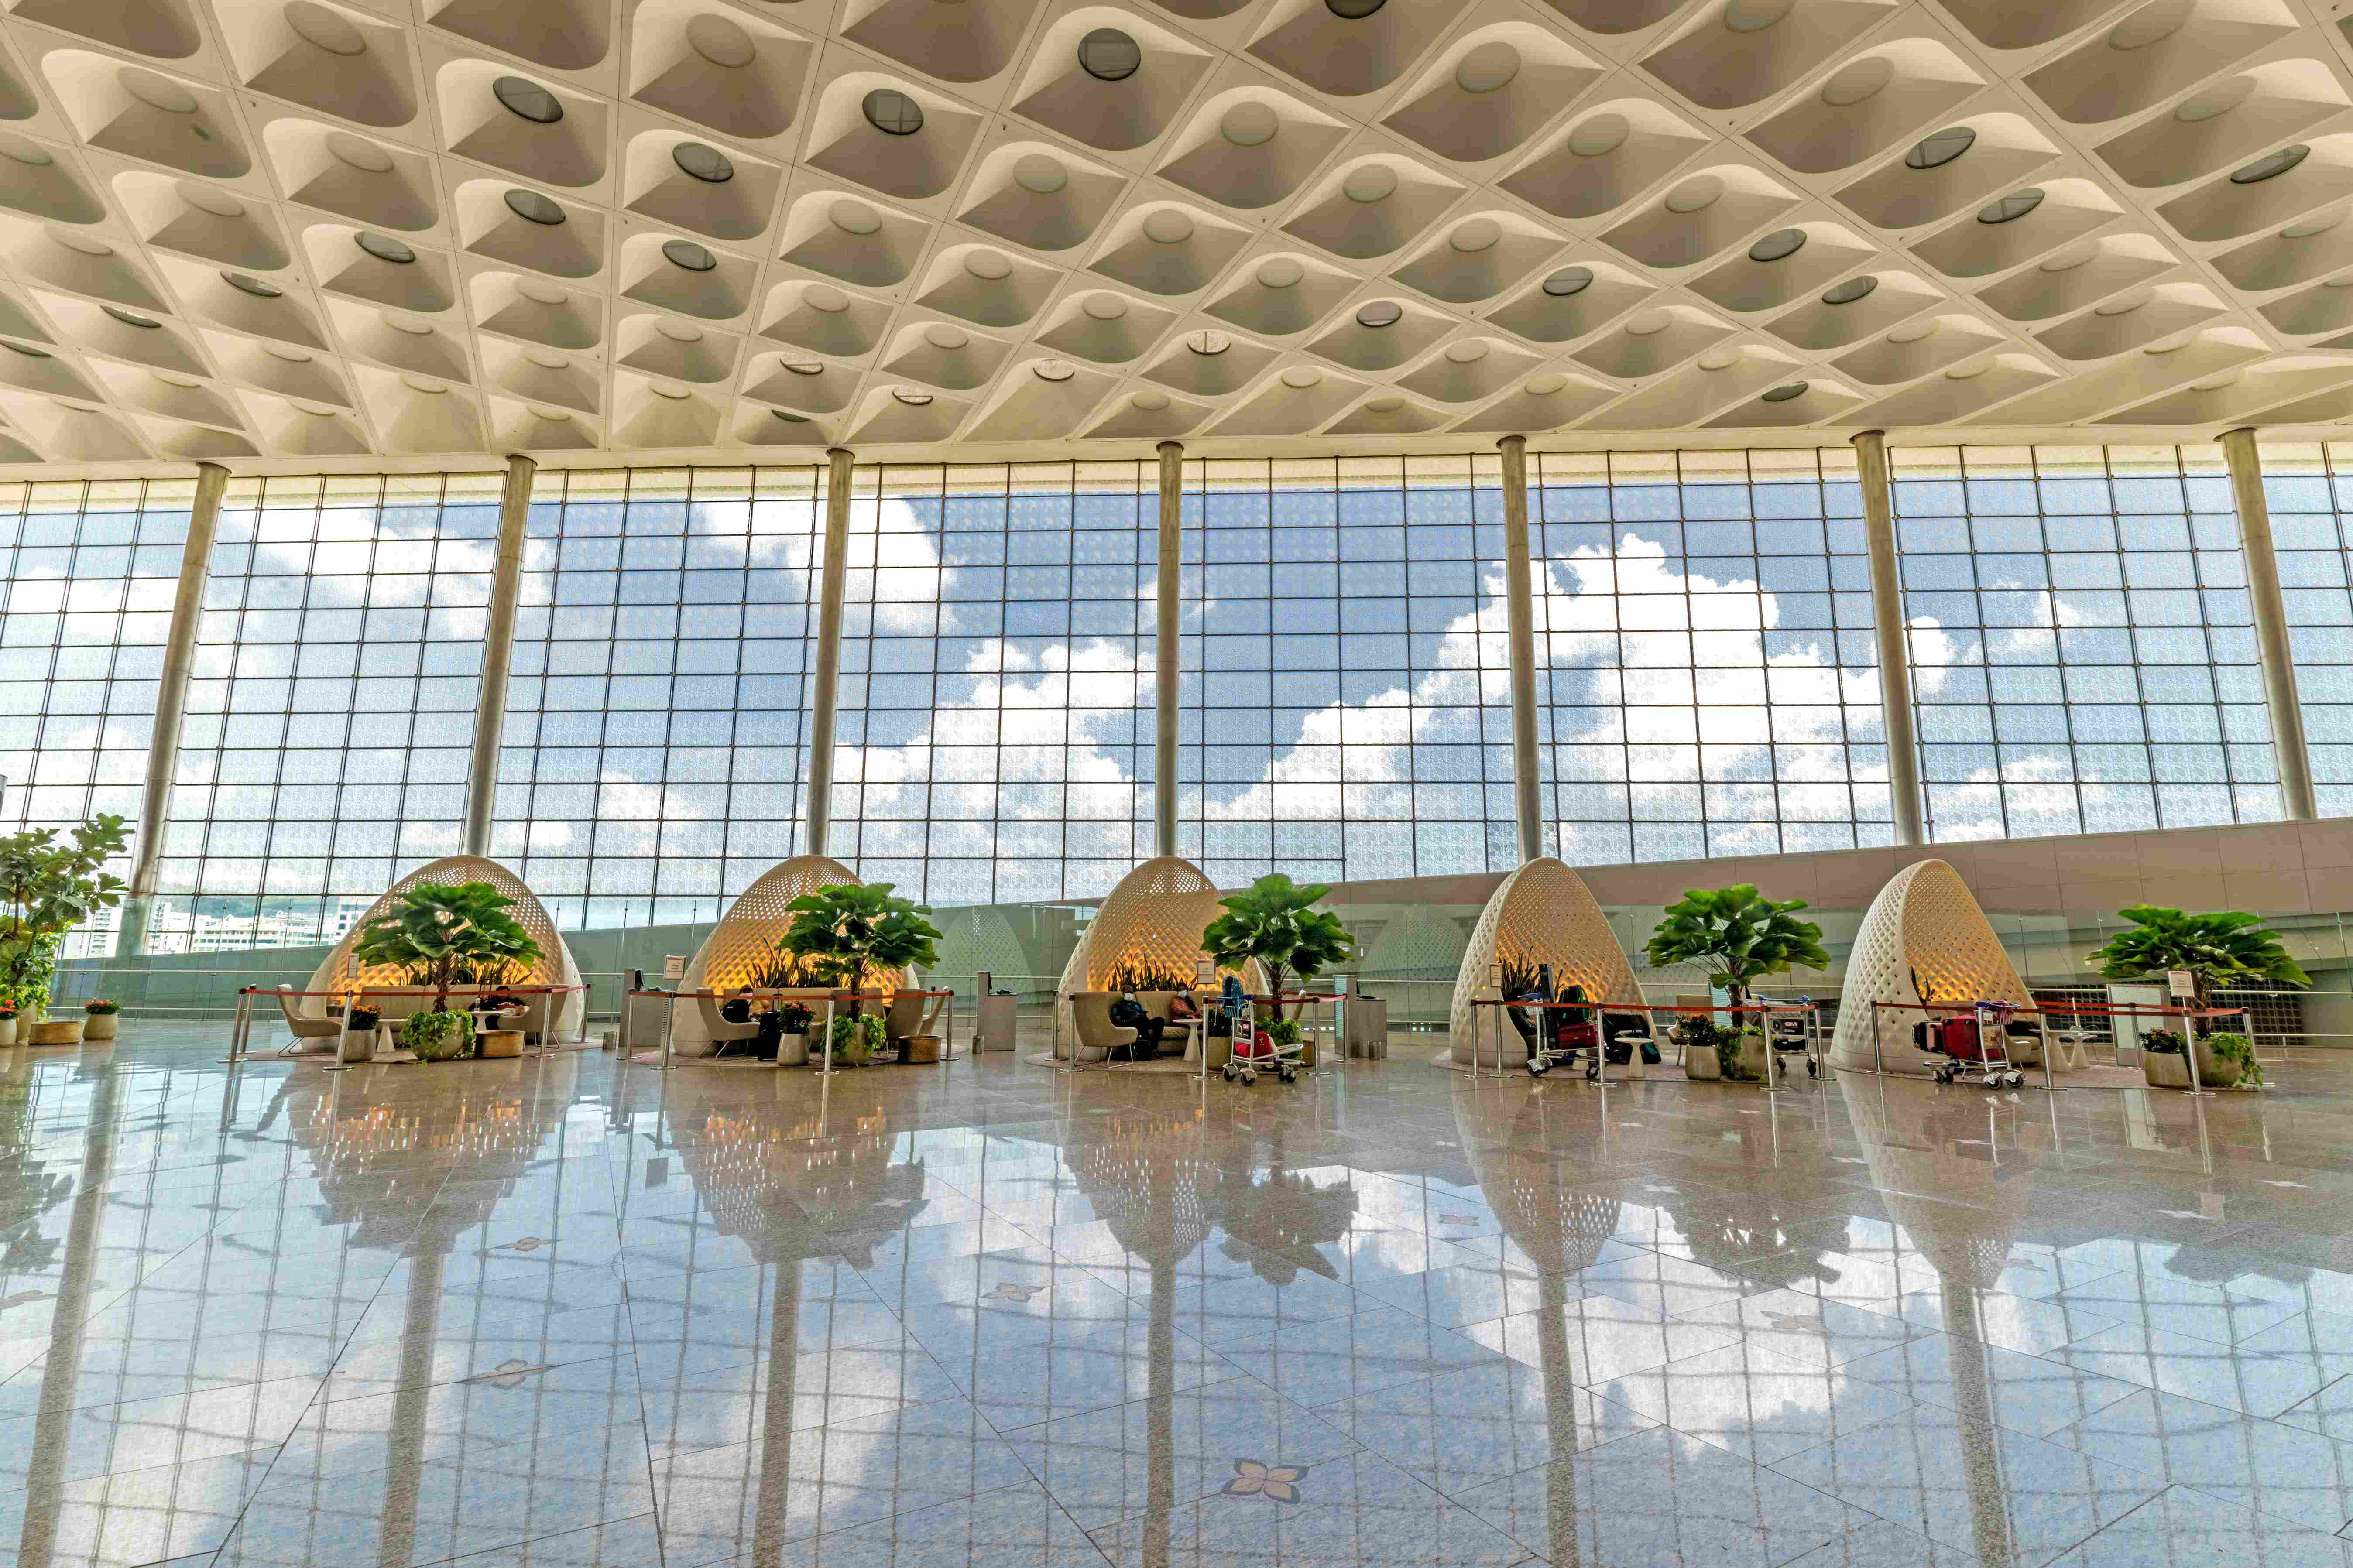 Mumbai’s CSMIA-Terminal 2 recertified as PLATINUM rated Green Existing Building Project by the Indian Green Building Council (IGBC)